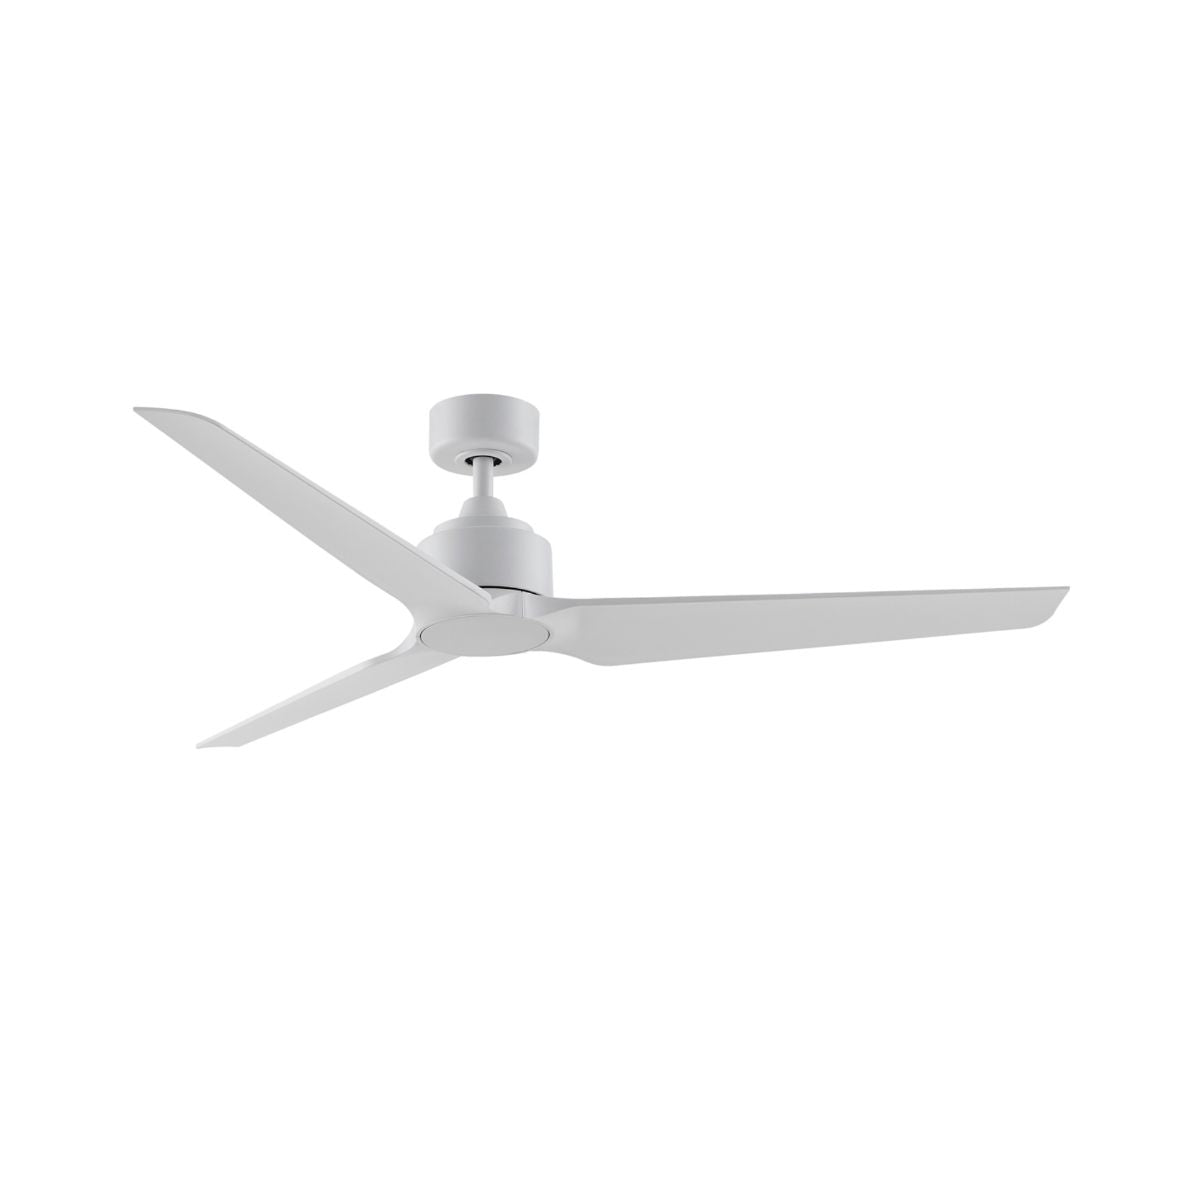 TriAire Custom Outdoor Ceiling Fan Motor With Remote, Set of 3 Blades (44 - 60 Inch) Sold Separately